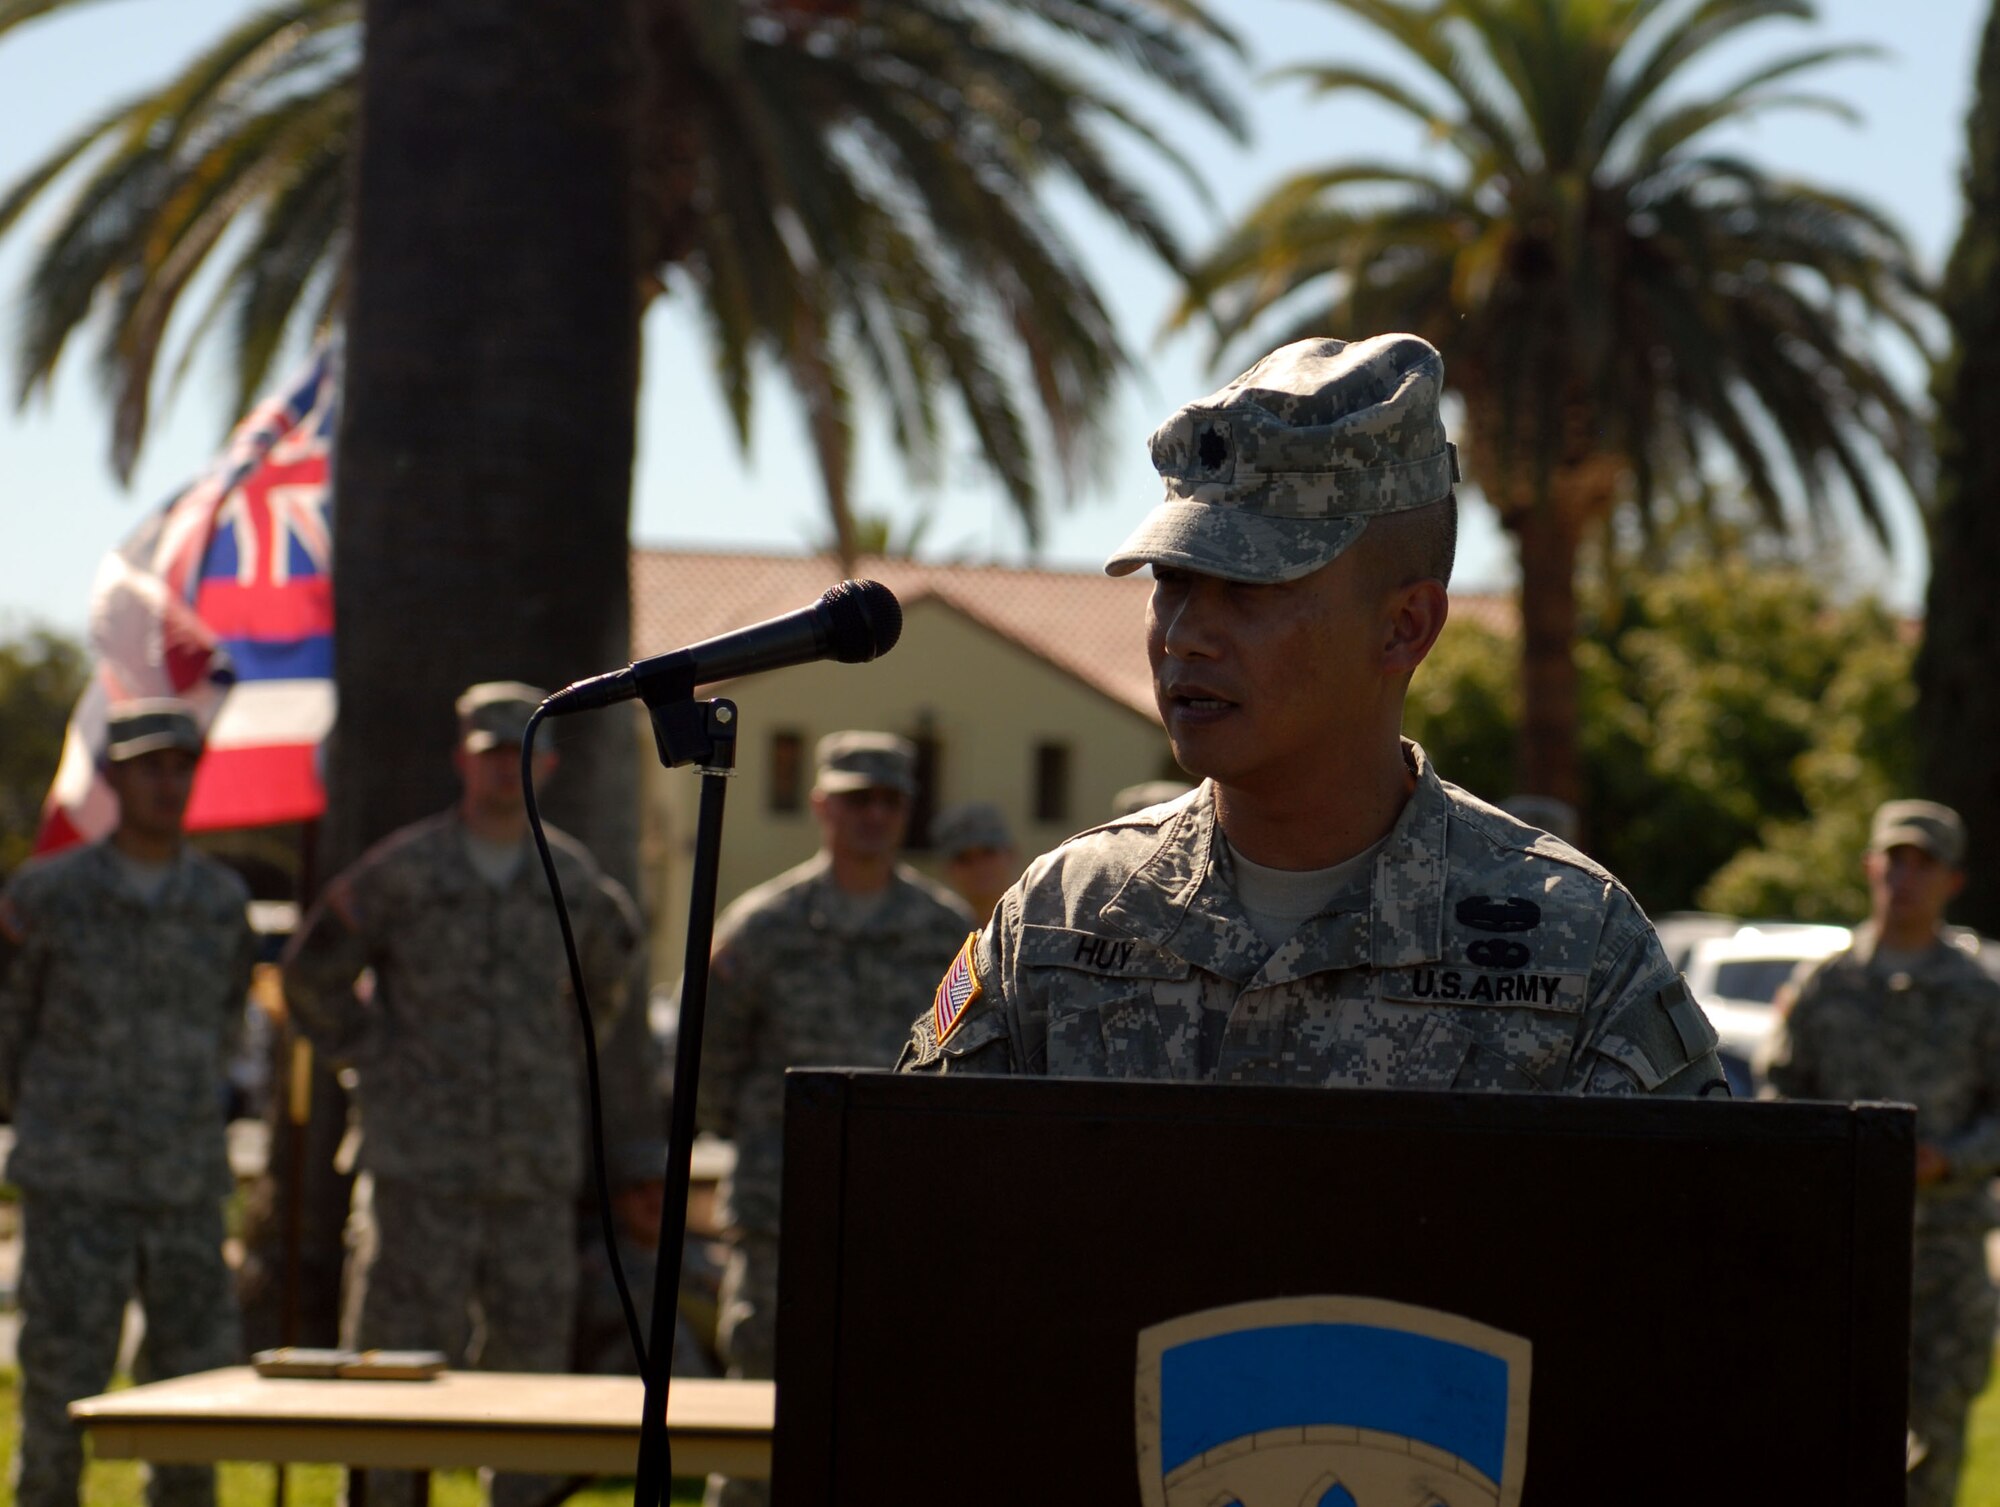 Army Lt. Col. Anthony T. Huy addresses the audience after accepting command of the 304th Sustainment Brigade’s Special Troops Battalion on the parade field at March Air Reserve Base, Calif., Oct. 9, 2011.  “I started out in the Army at a private,” Huy said. “And to be accepting command today is the proudest moment of my military career.” (US Army photo by Sgt. Ruben Chicas)